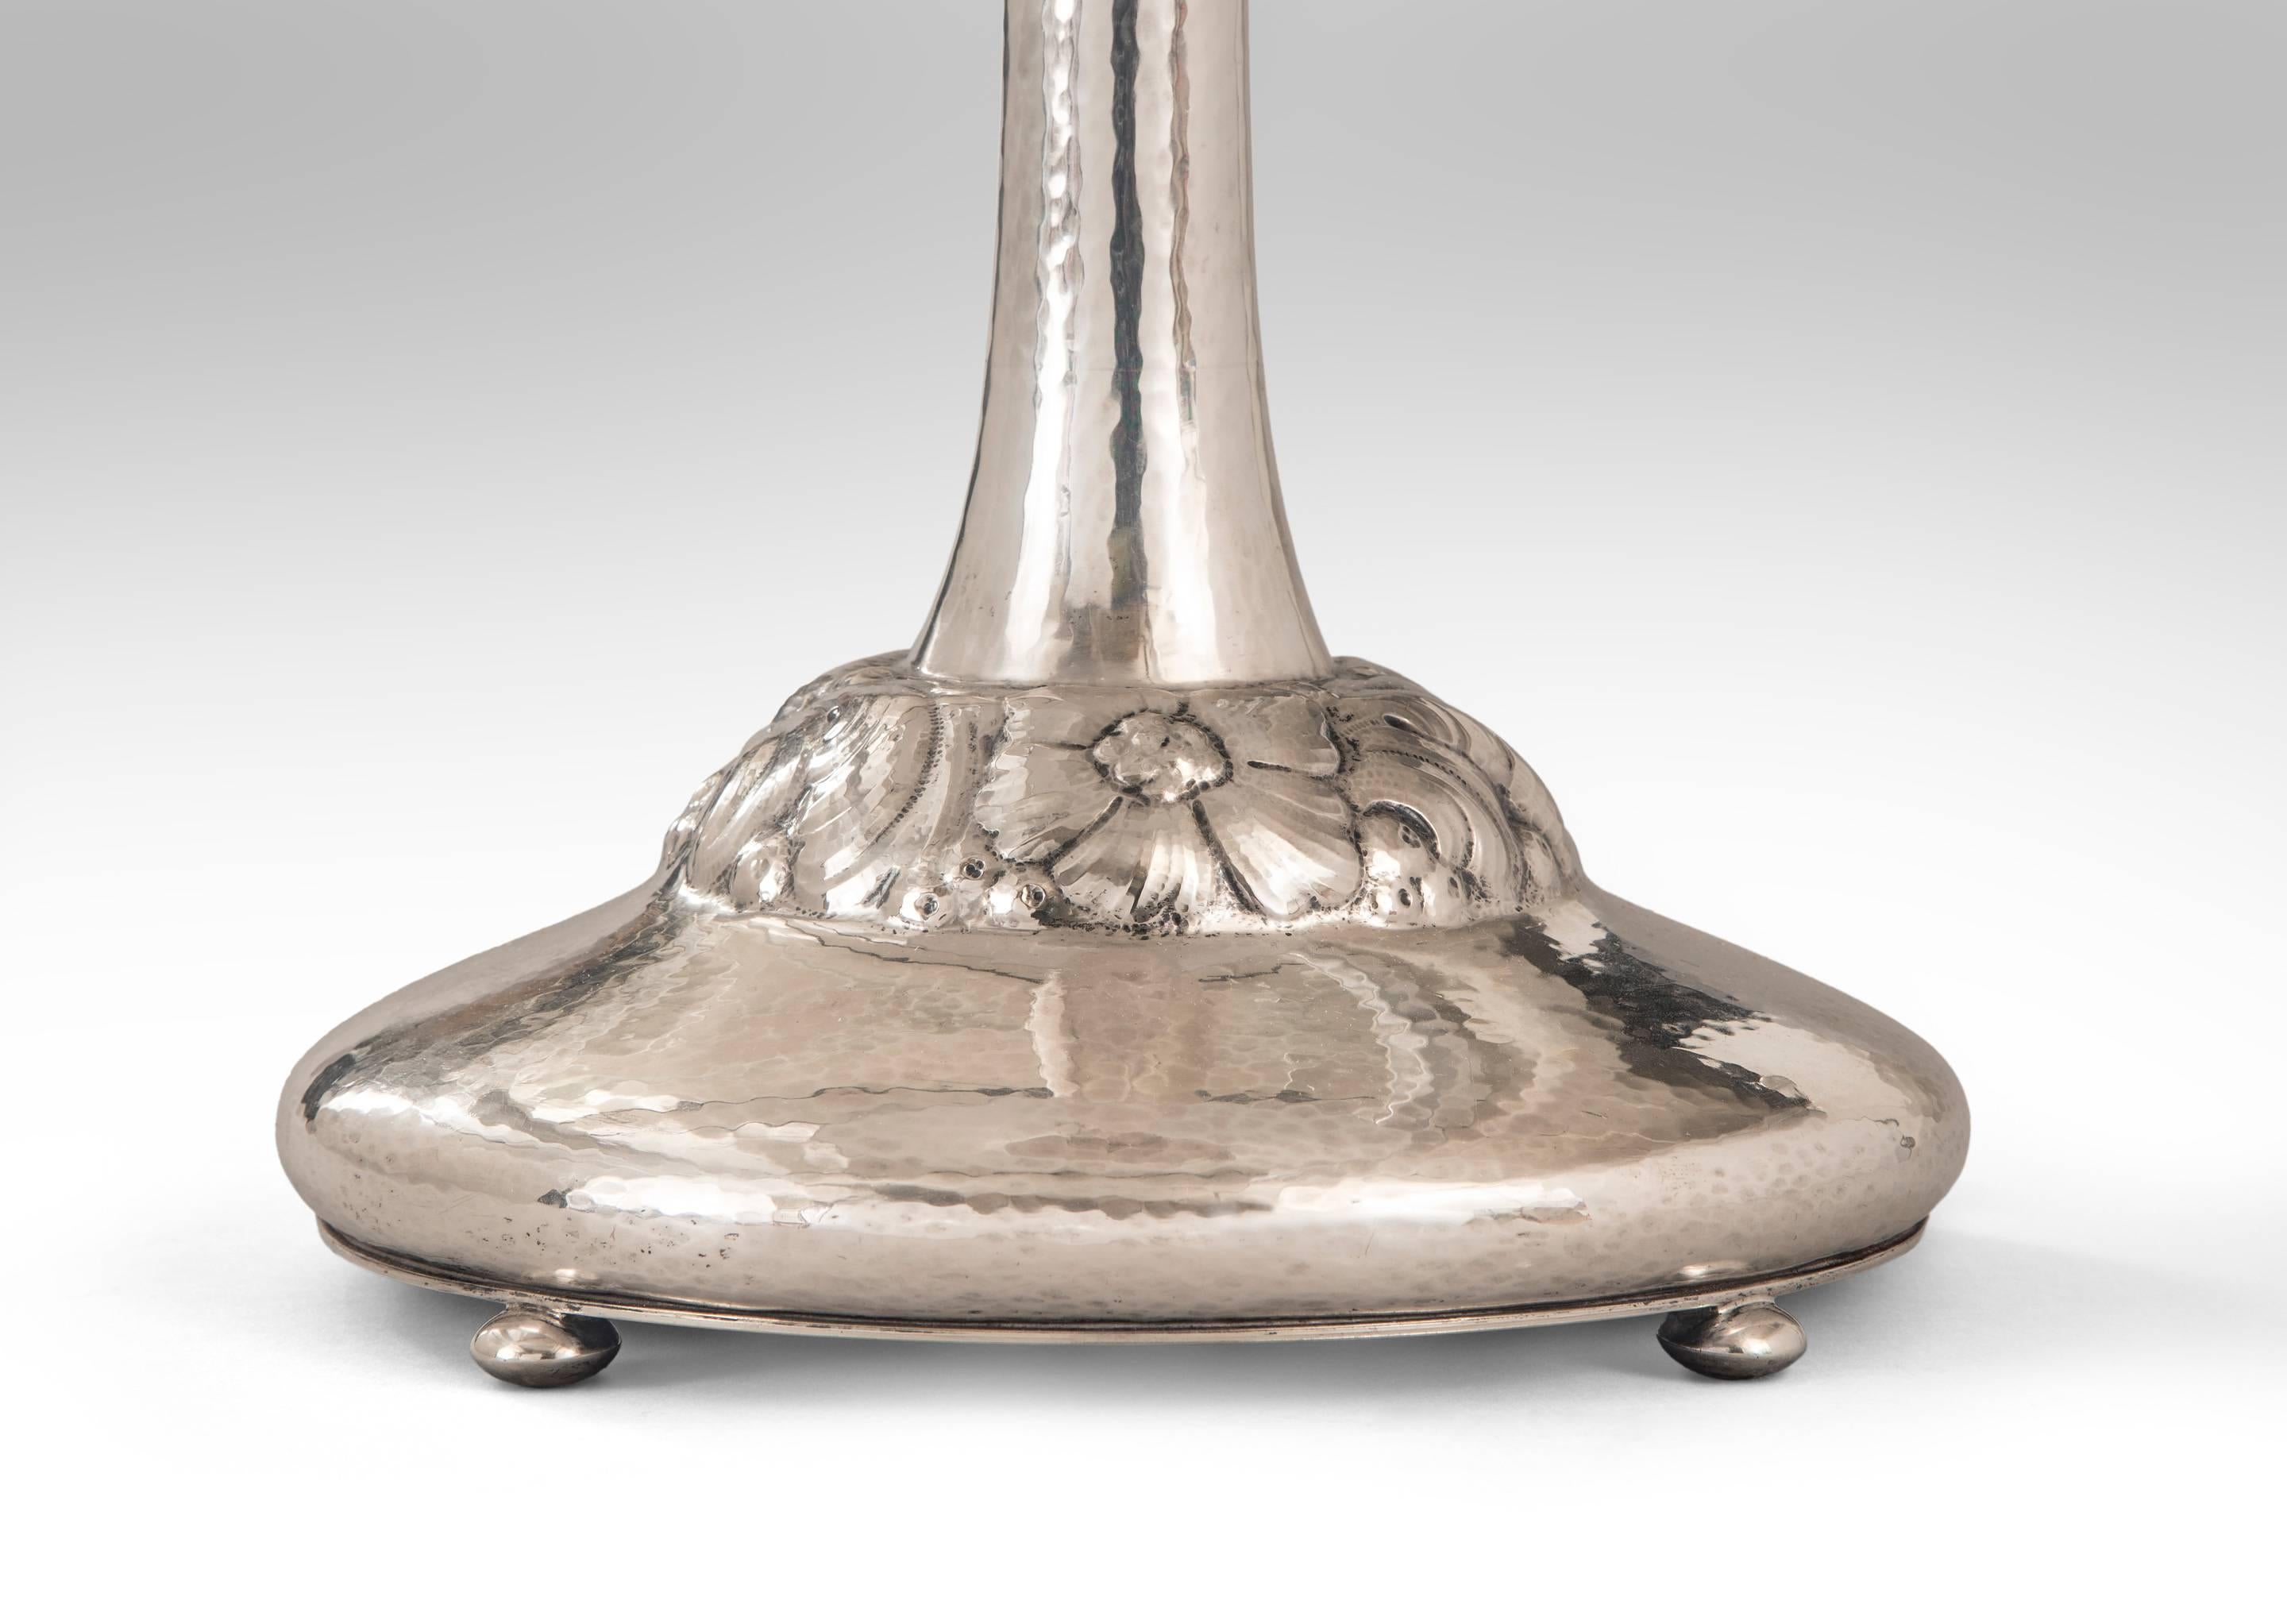 Good scale and finely detailed silver. The tapering standard terminating in a low relief floral and foliate domed base. Hallmarked: C.G. Hallberg S Y7